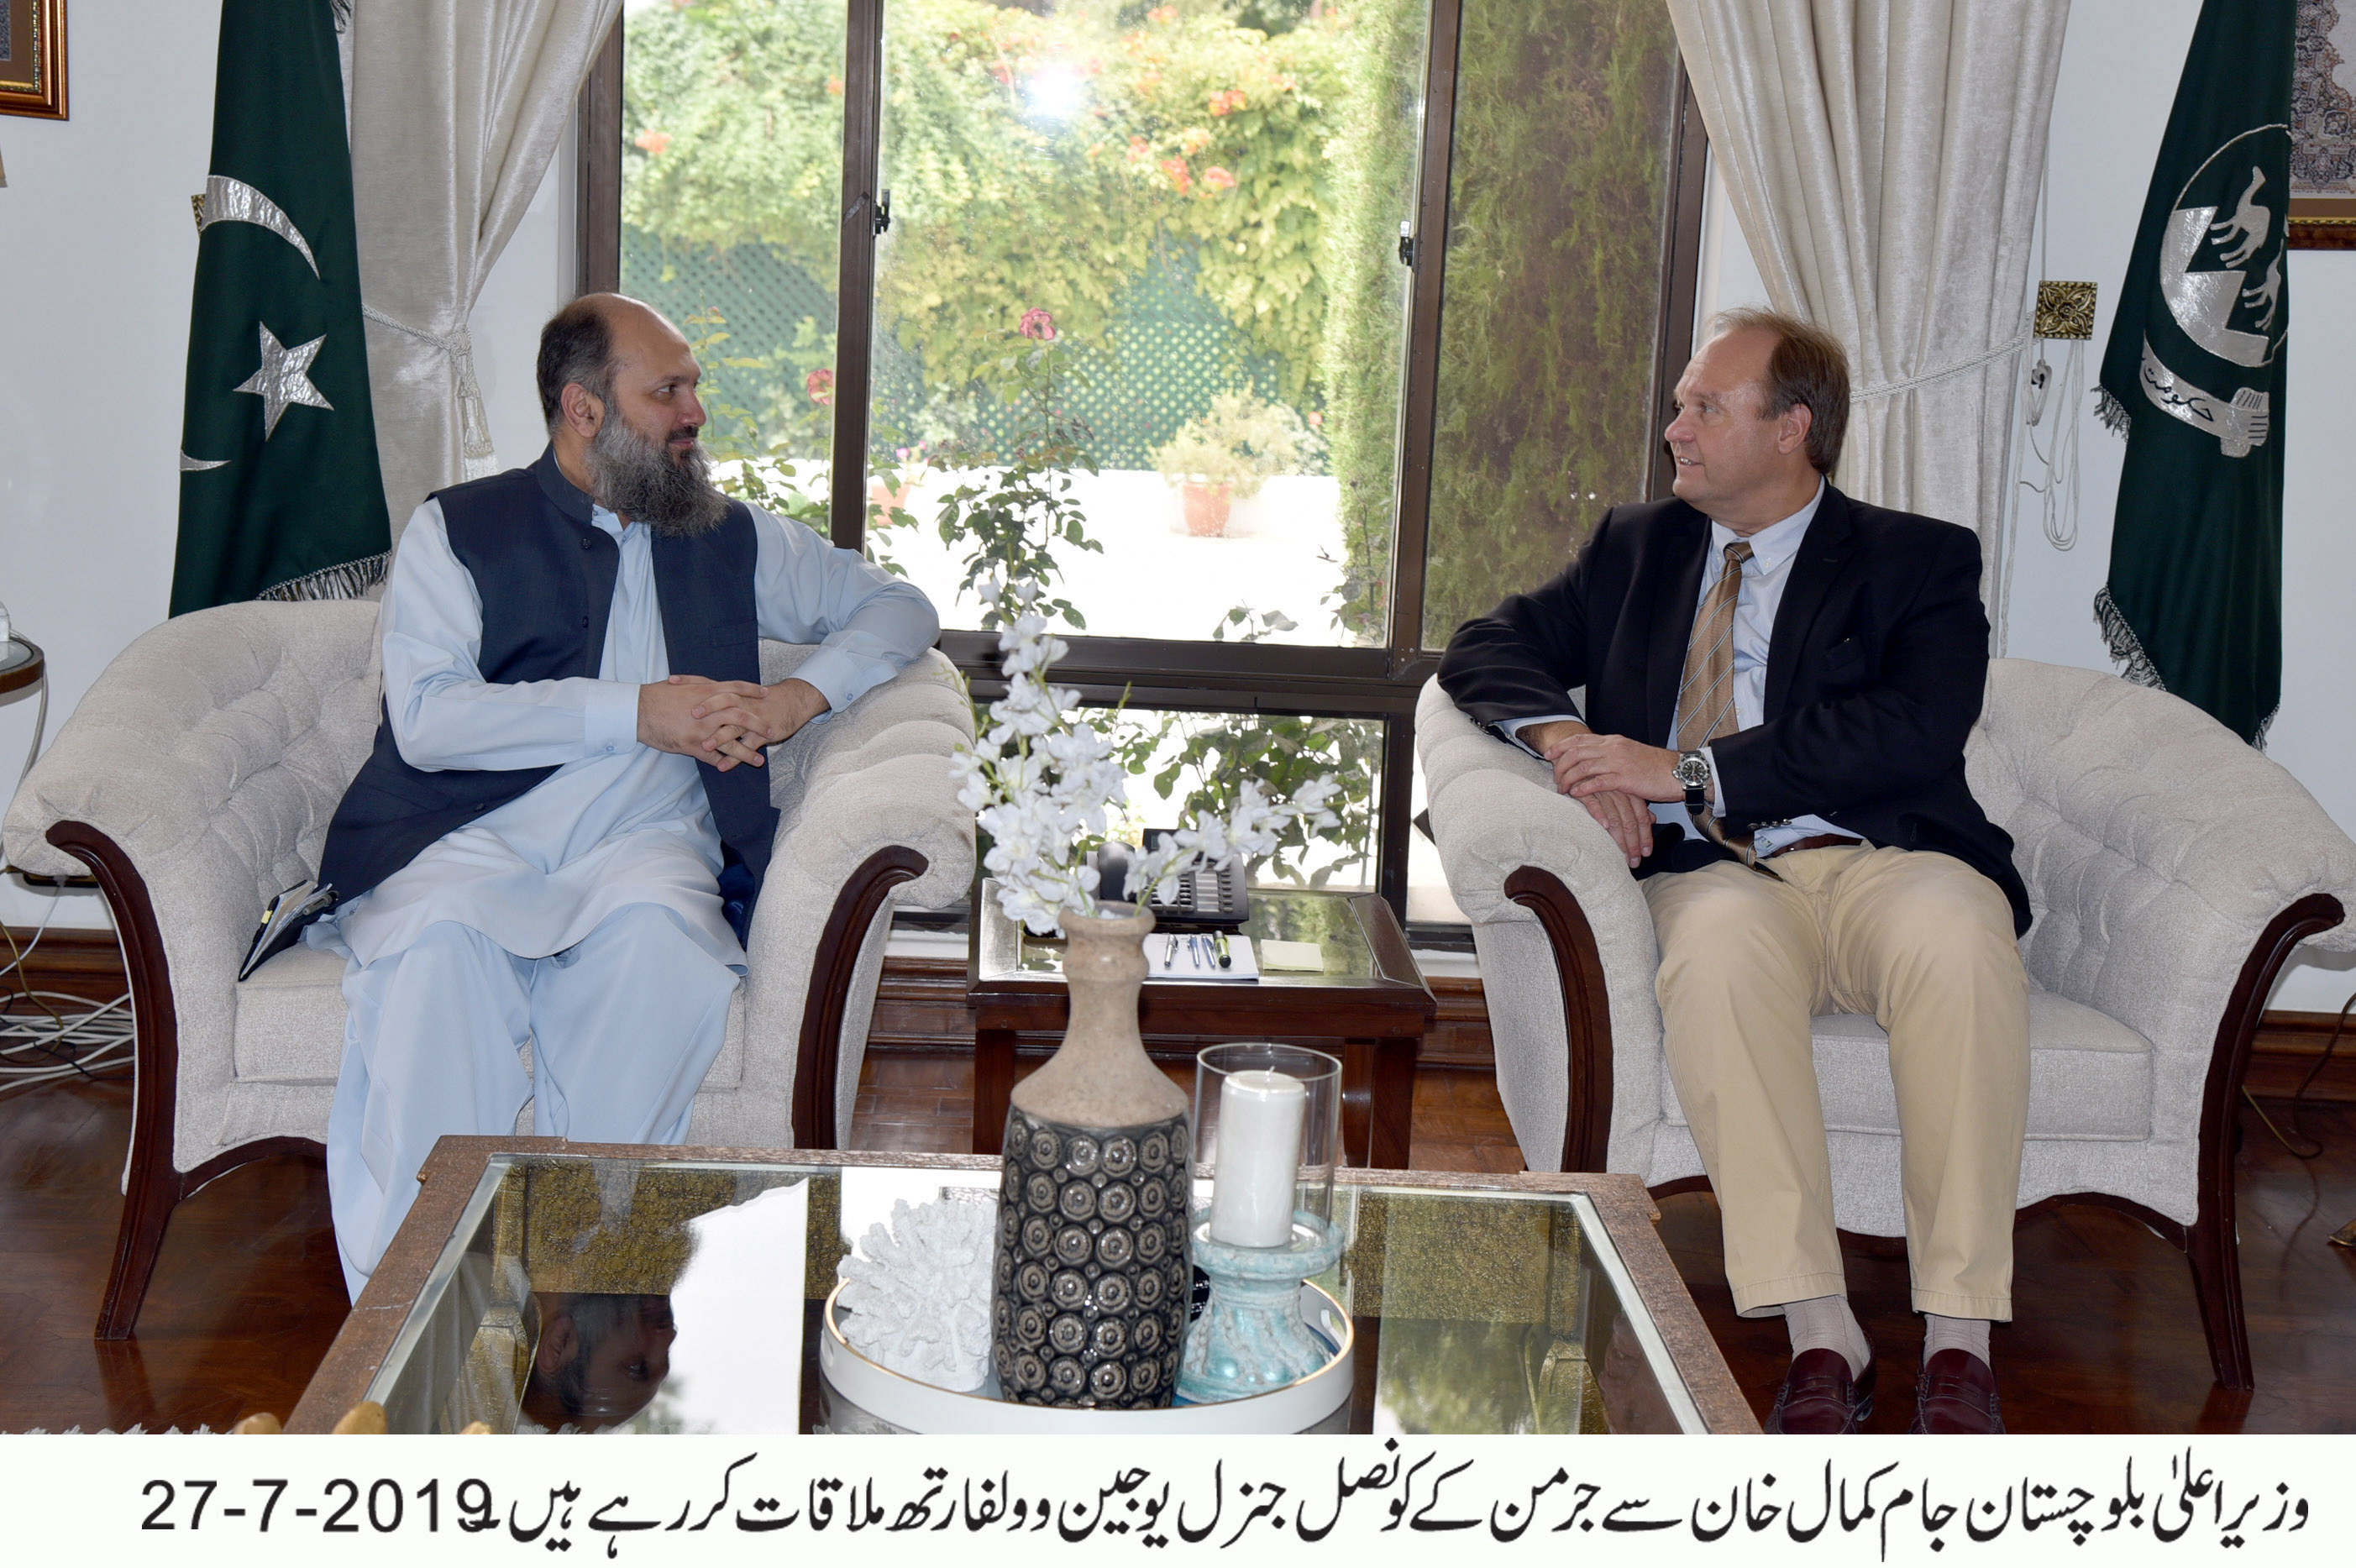 cm kamal exchanges views with german consul general eugen wollfarth during a meeting in quetta photo nni